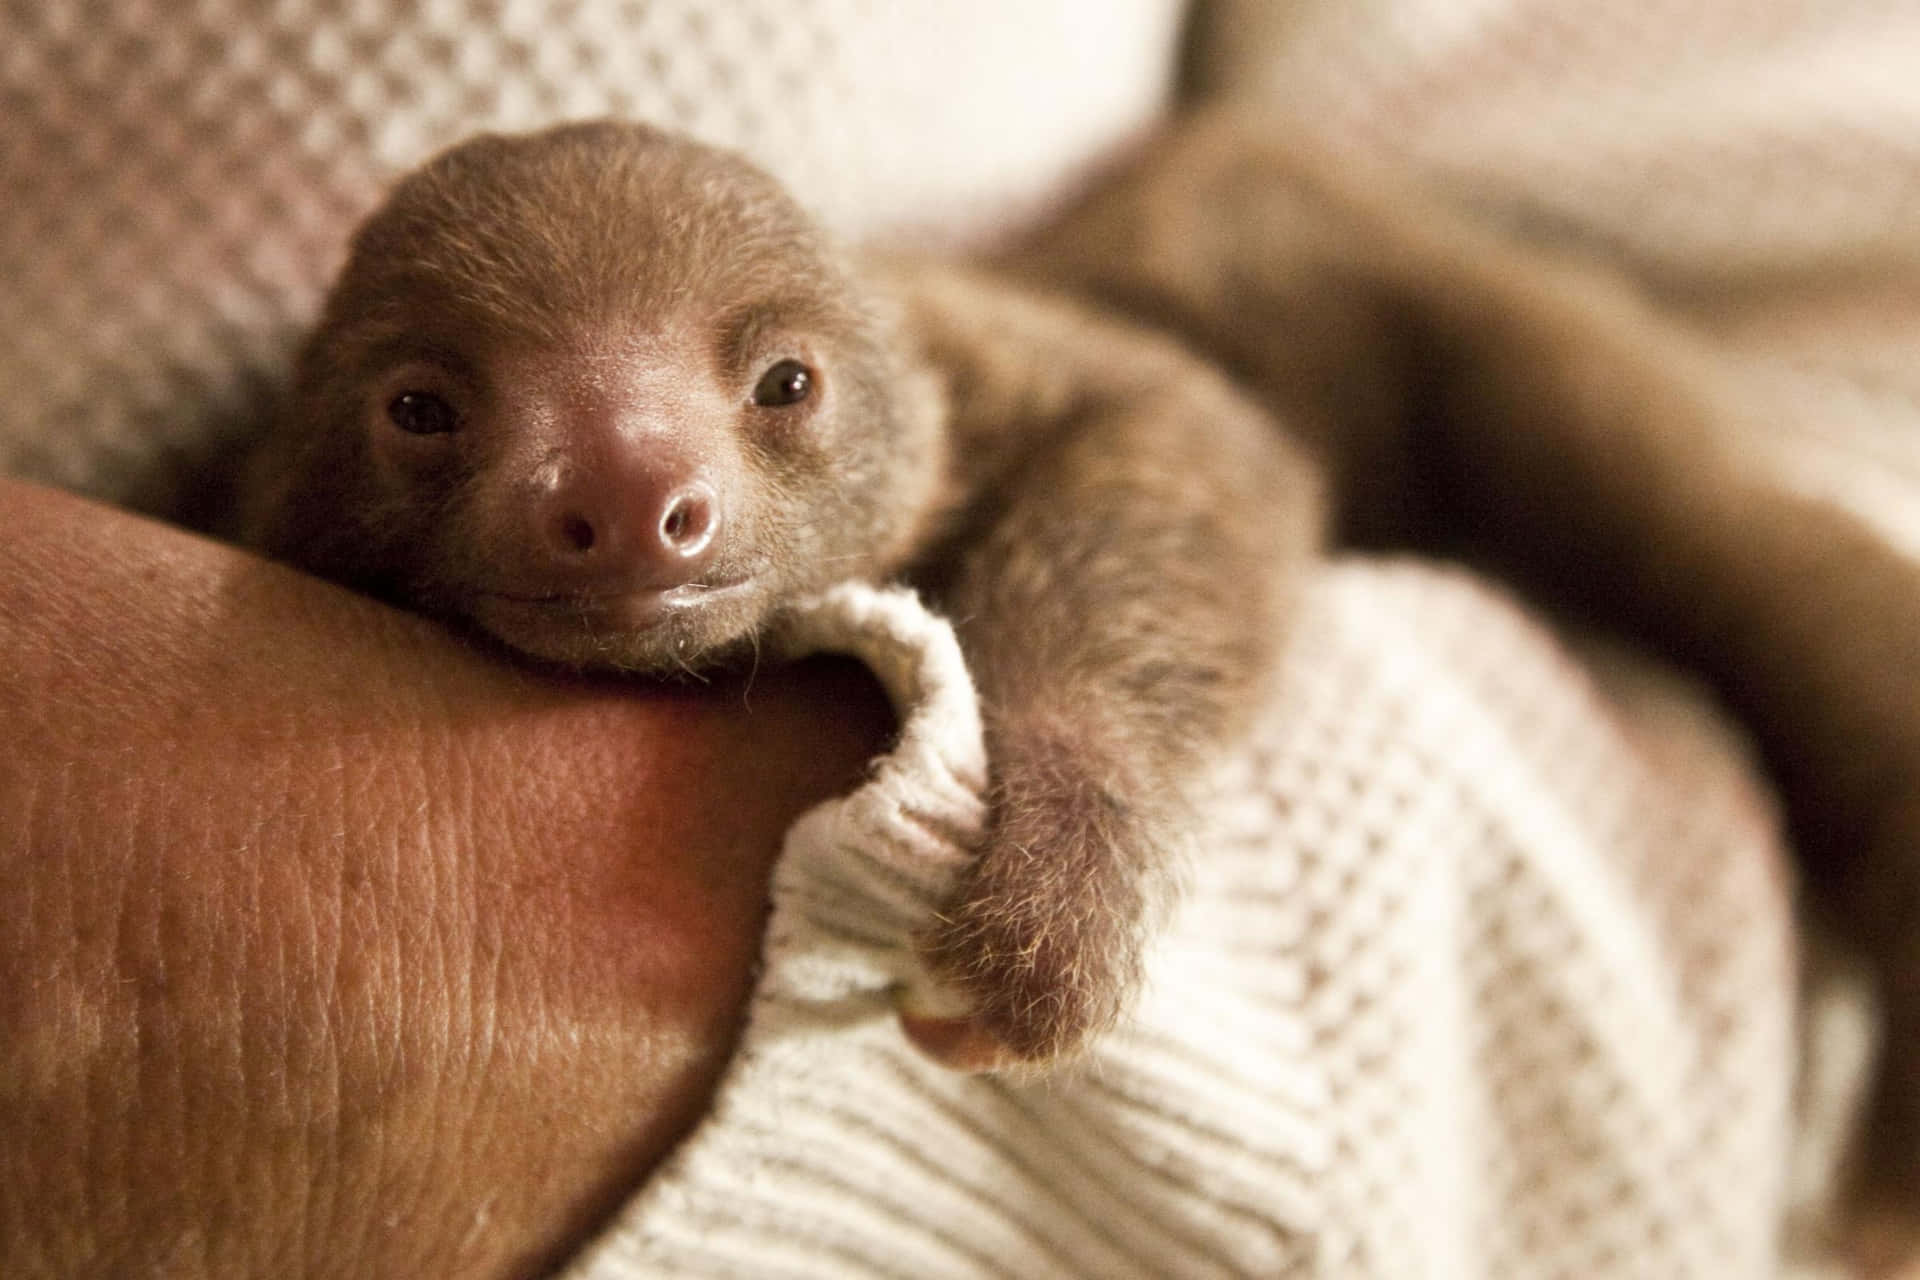 'Be Curious, Just Like This Adorable Baby Sloth'